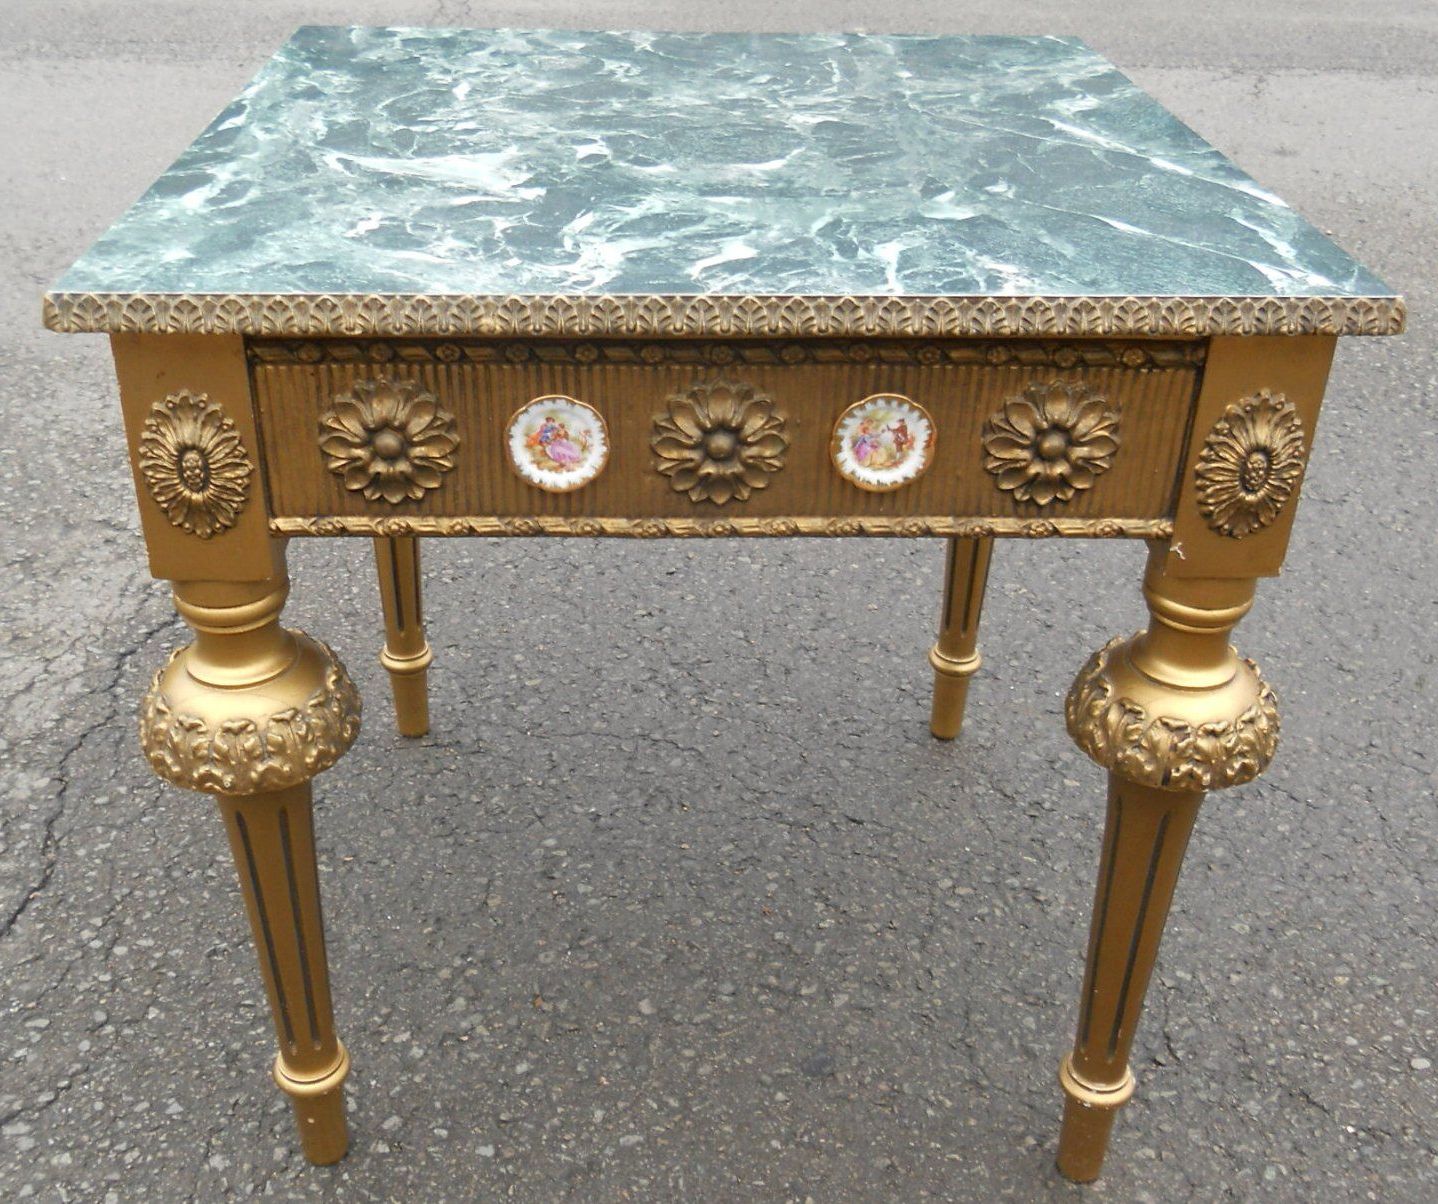 Preferred Antique White Black Coffee Tables Throughout Antique Style Gilt Coffee Table (View 17 of 20)